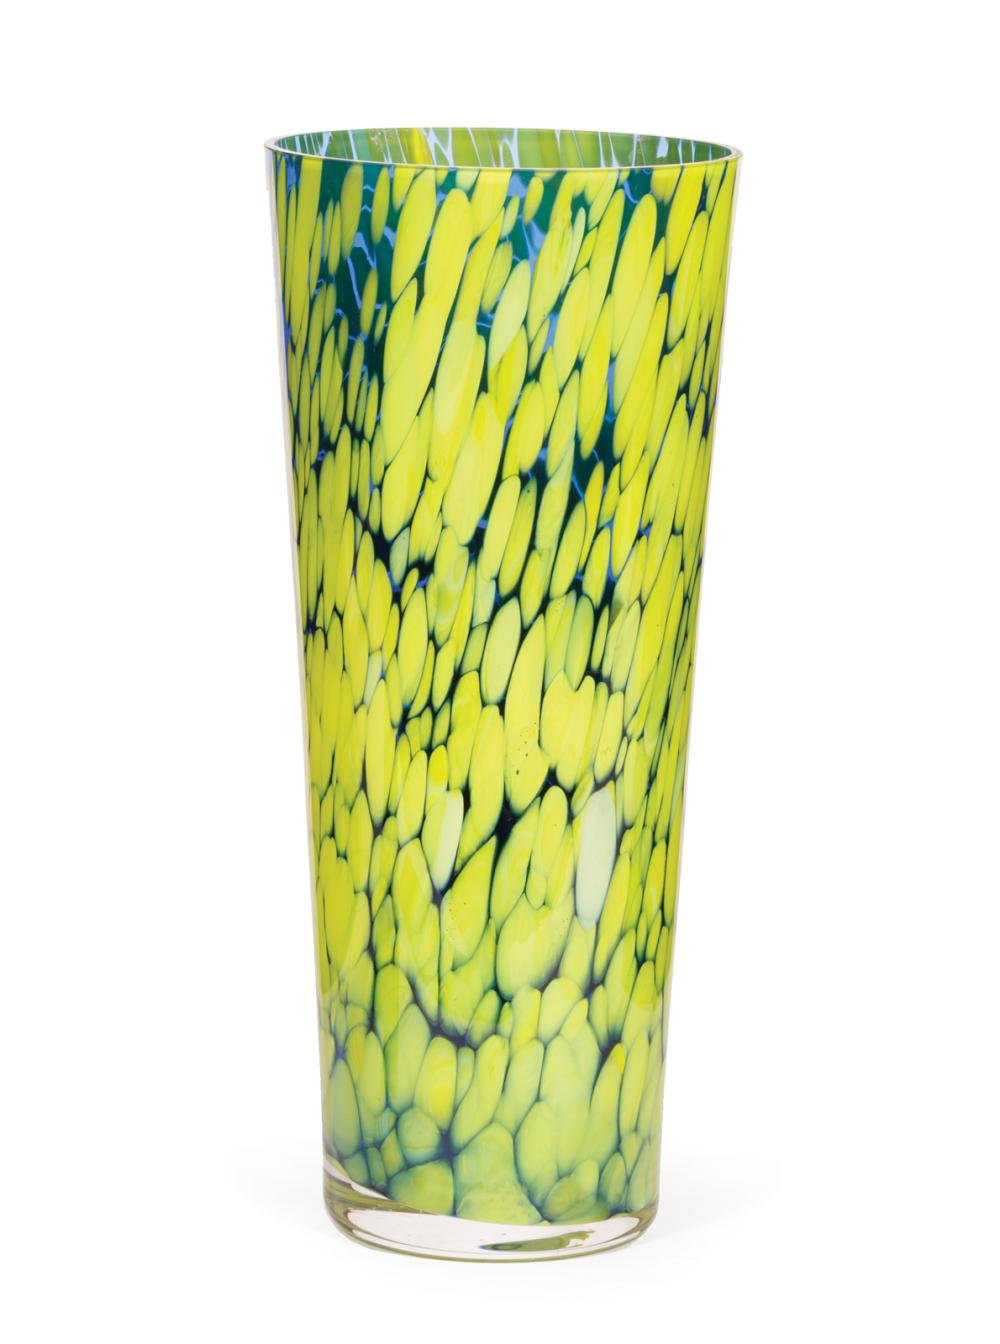 ART GLASS YELLOW AND BLUE VASEArt Glass